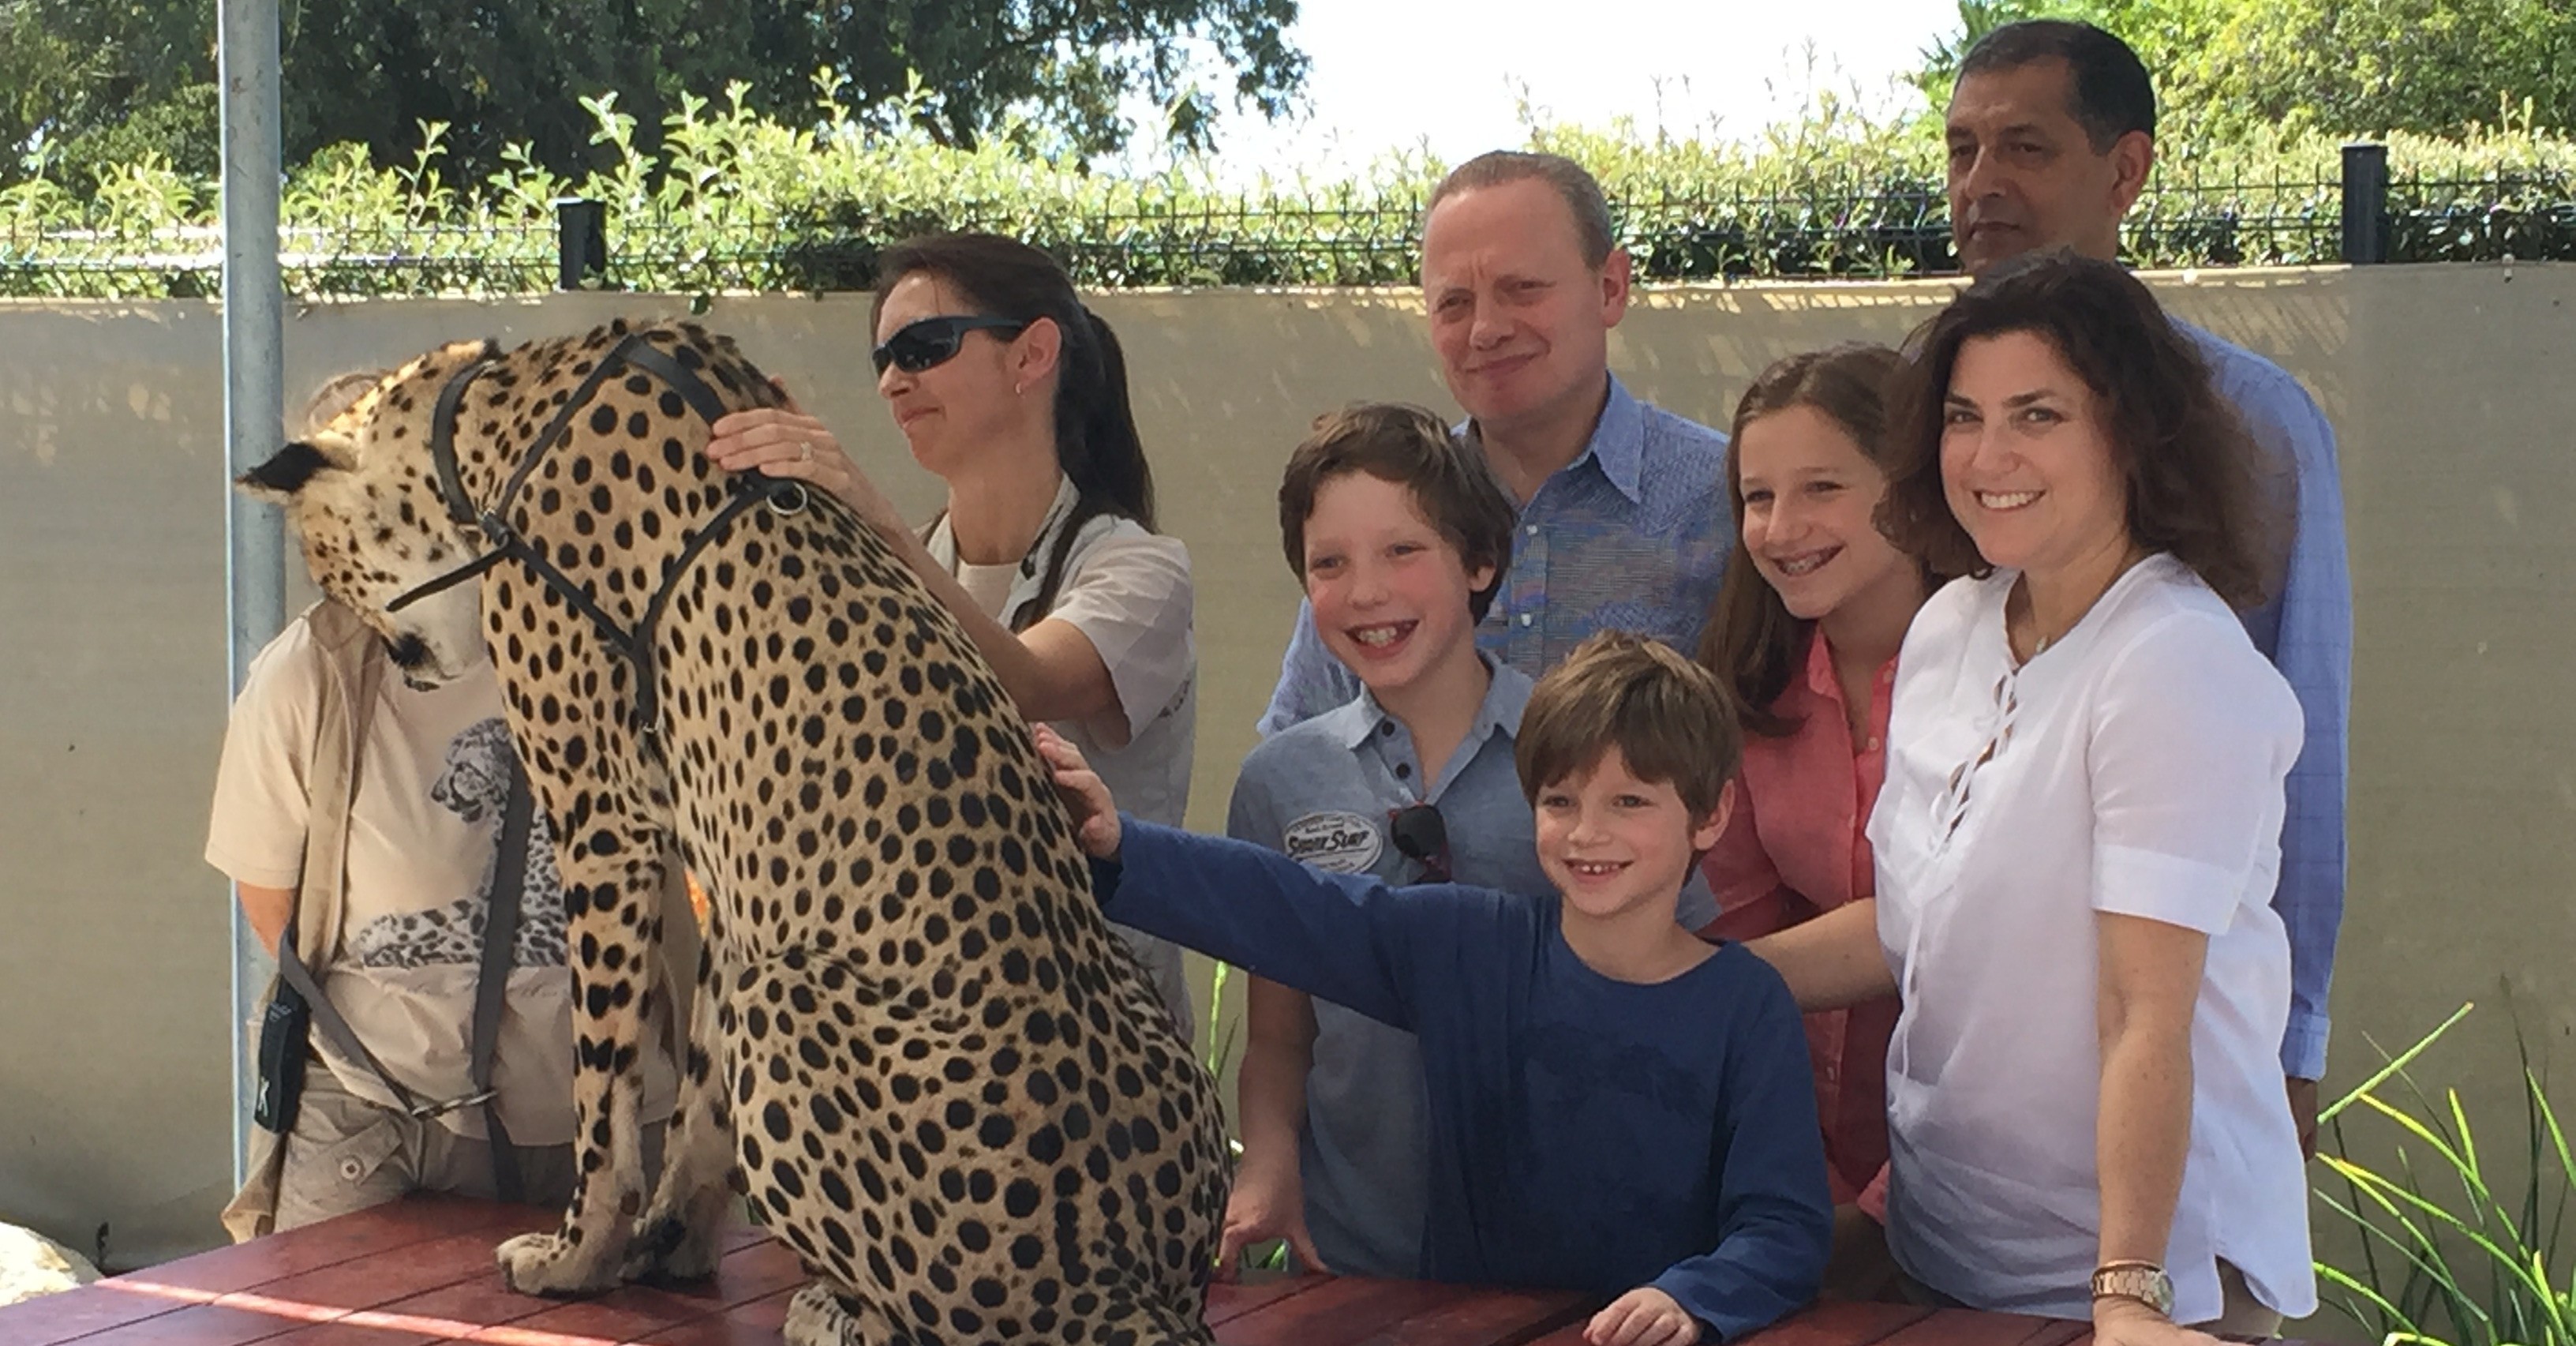 Tollman Family with Cheetah